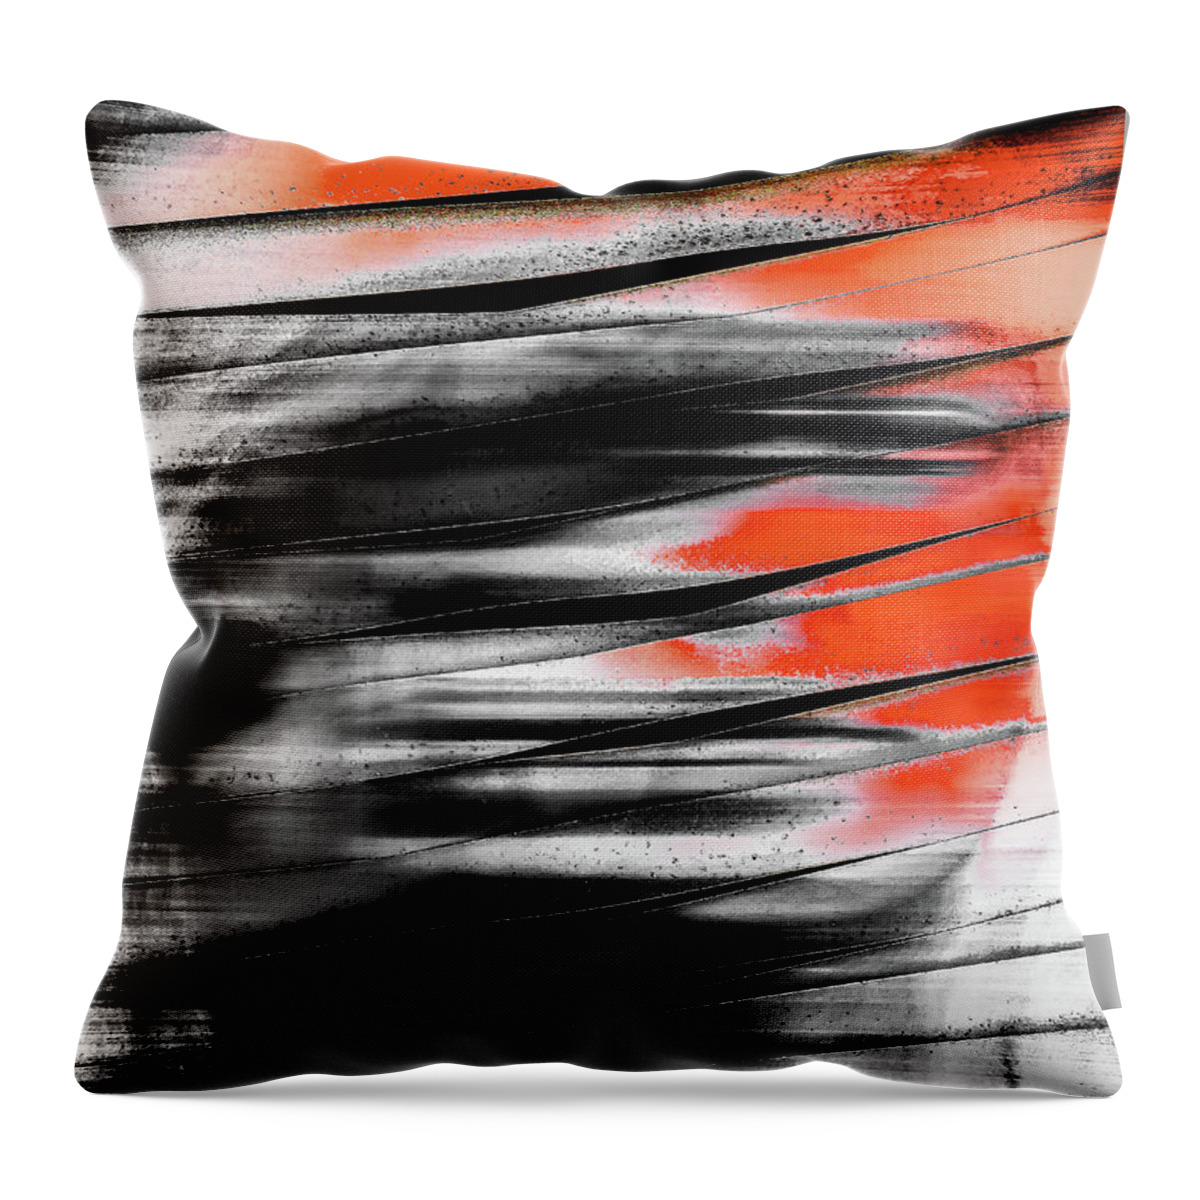 Jalousie Throw Pillow featuring the photograph The woman behind the jalousie by Gabi Hampe